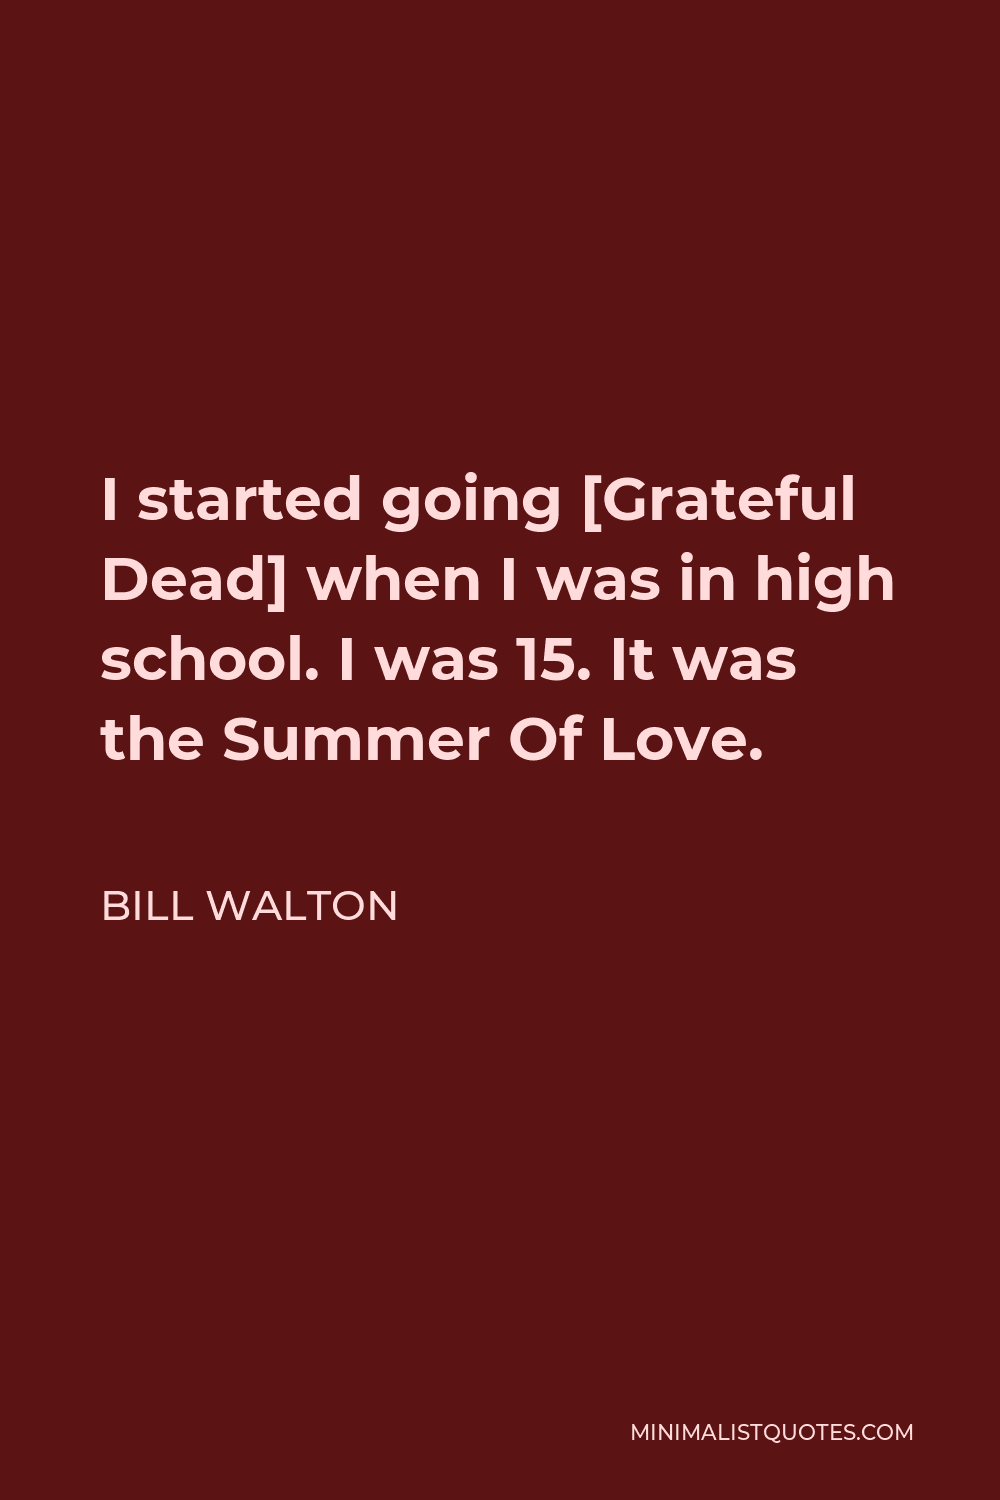 Bill Walton Quote - I started going [Grateful Dead] when I was in high school. I was 15. It was the Summer Of Love.